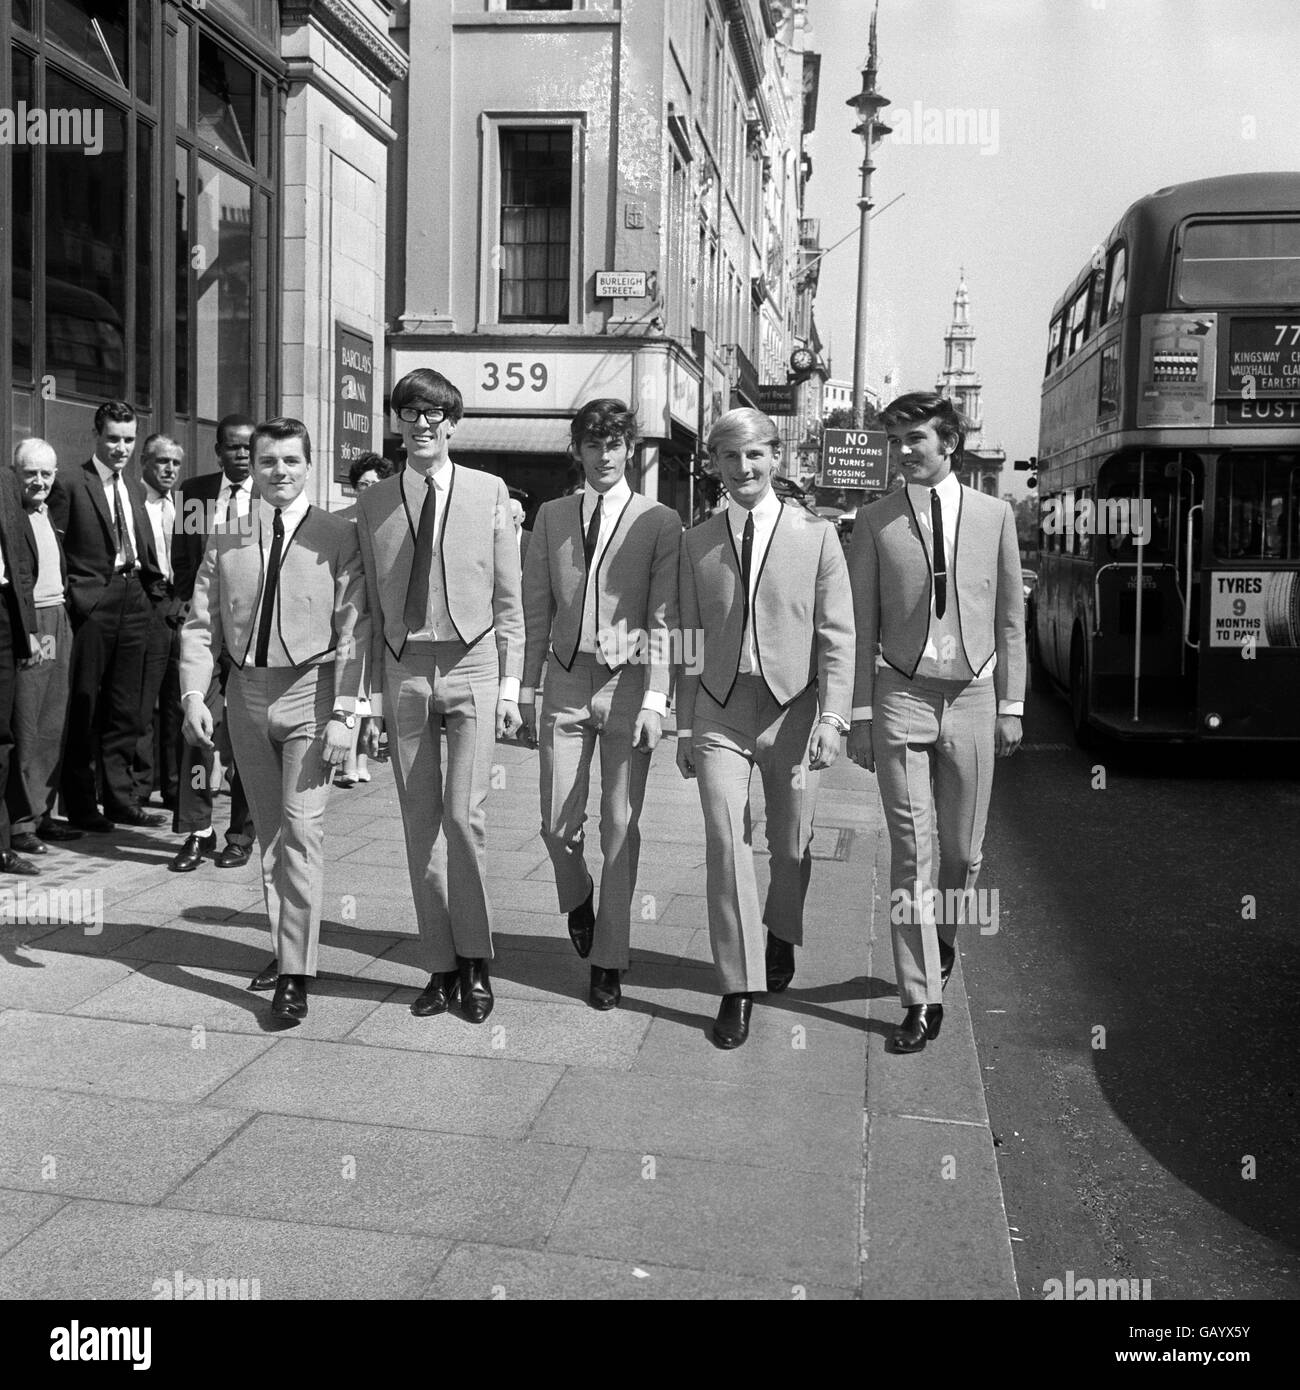 British Pop Music - The 1960s - The Takers - London - 1964 Stock Photo